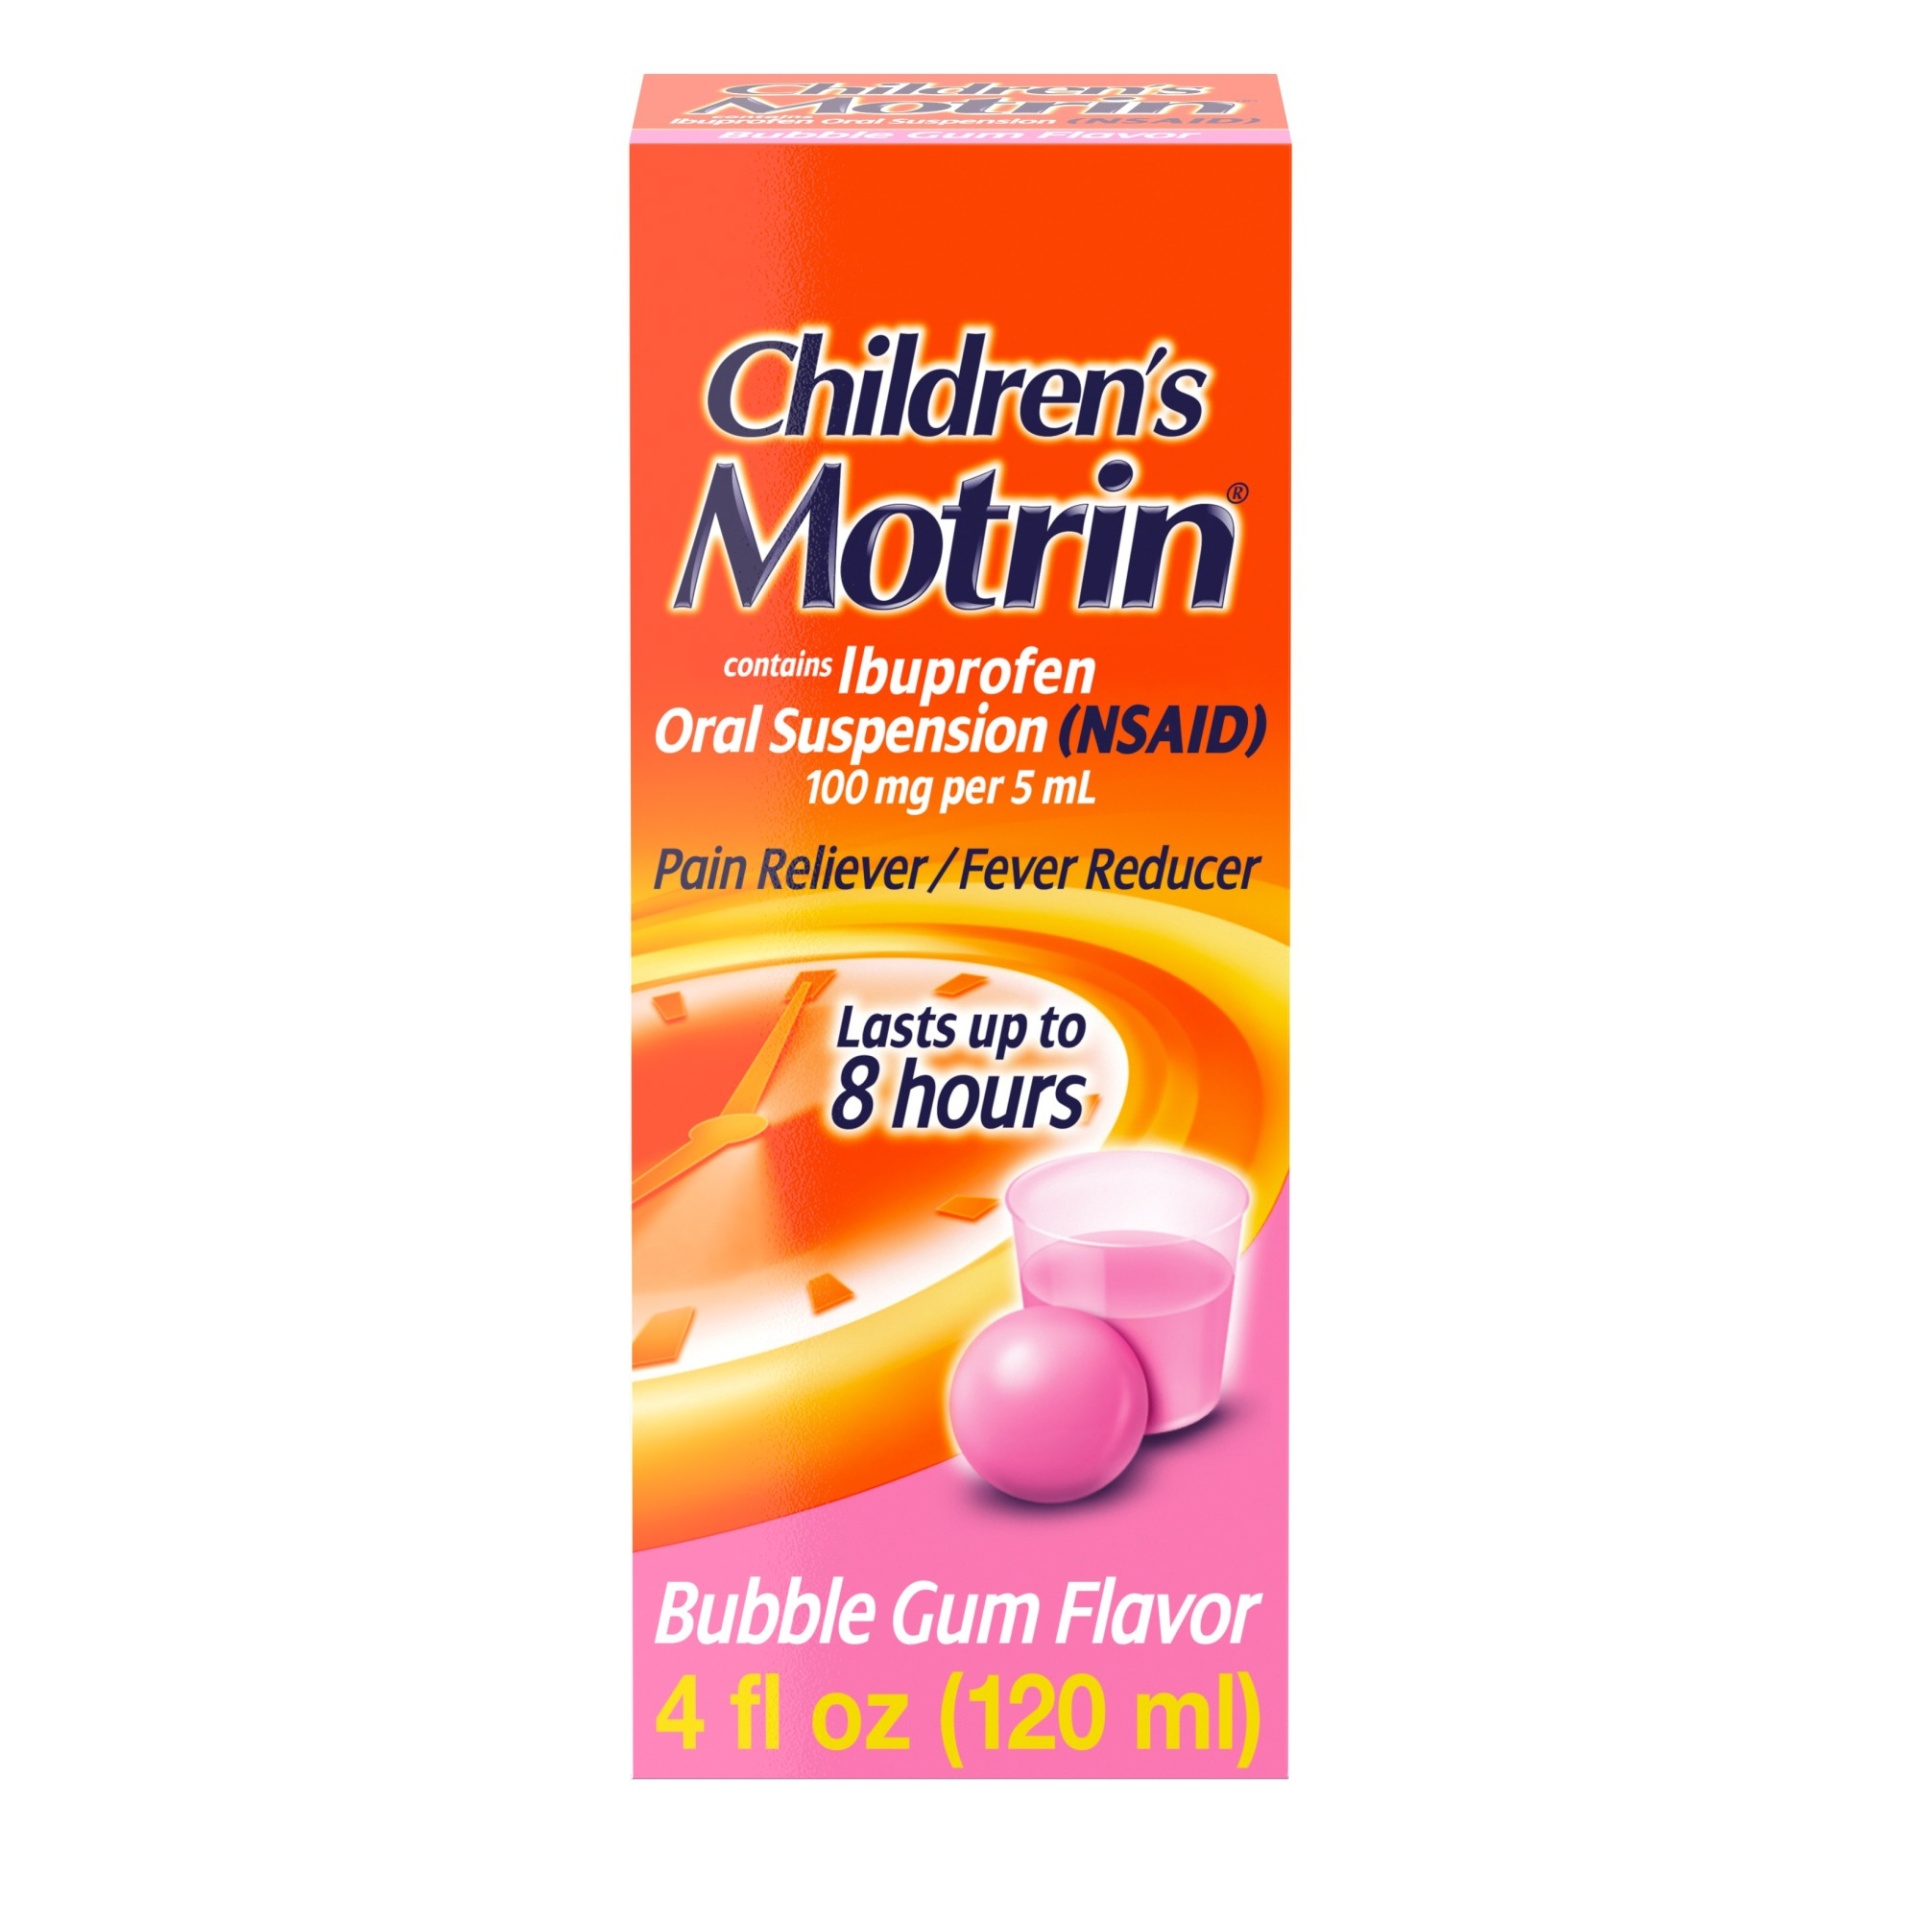 slide 1 of 6, Children's Motrin Oral Suspension Medicine, 100 mg Ibuprofen, Kids Fever Reducer & Pain Reliever for Minor Aches & Pains Due to Cold & Flu, Alcohol-Free, Bubble Gum Flavored, 4 fl oz